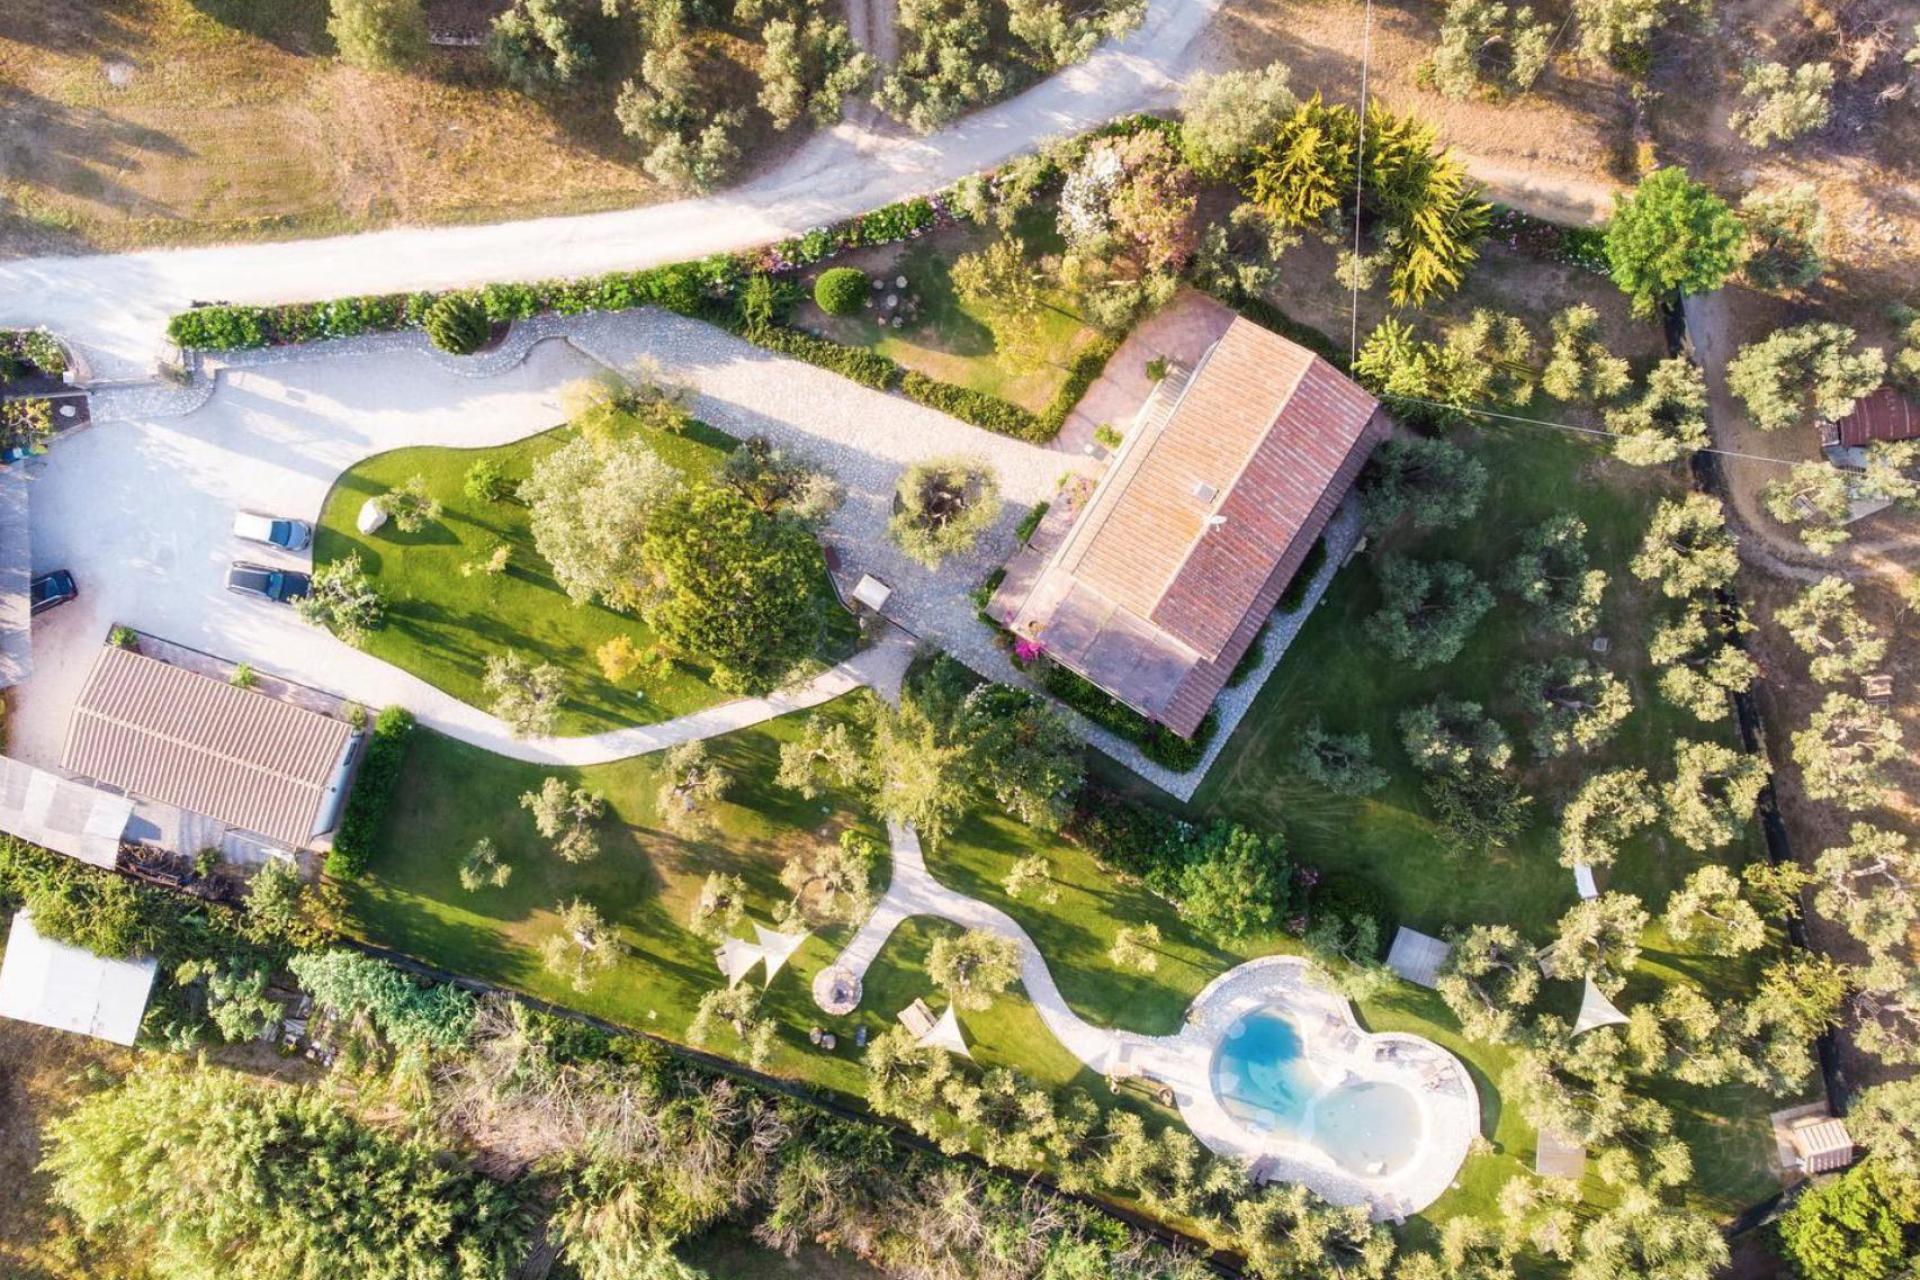 Small agriturismo surrounded by olive groves